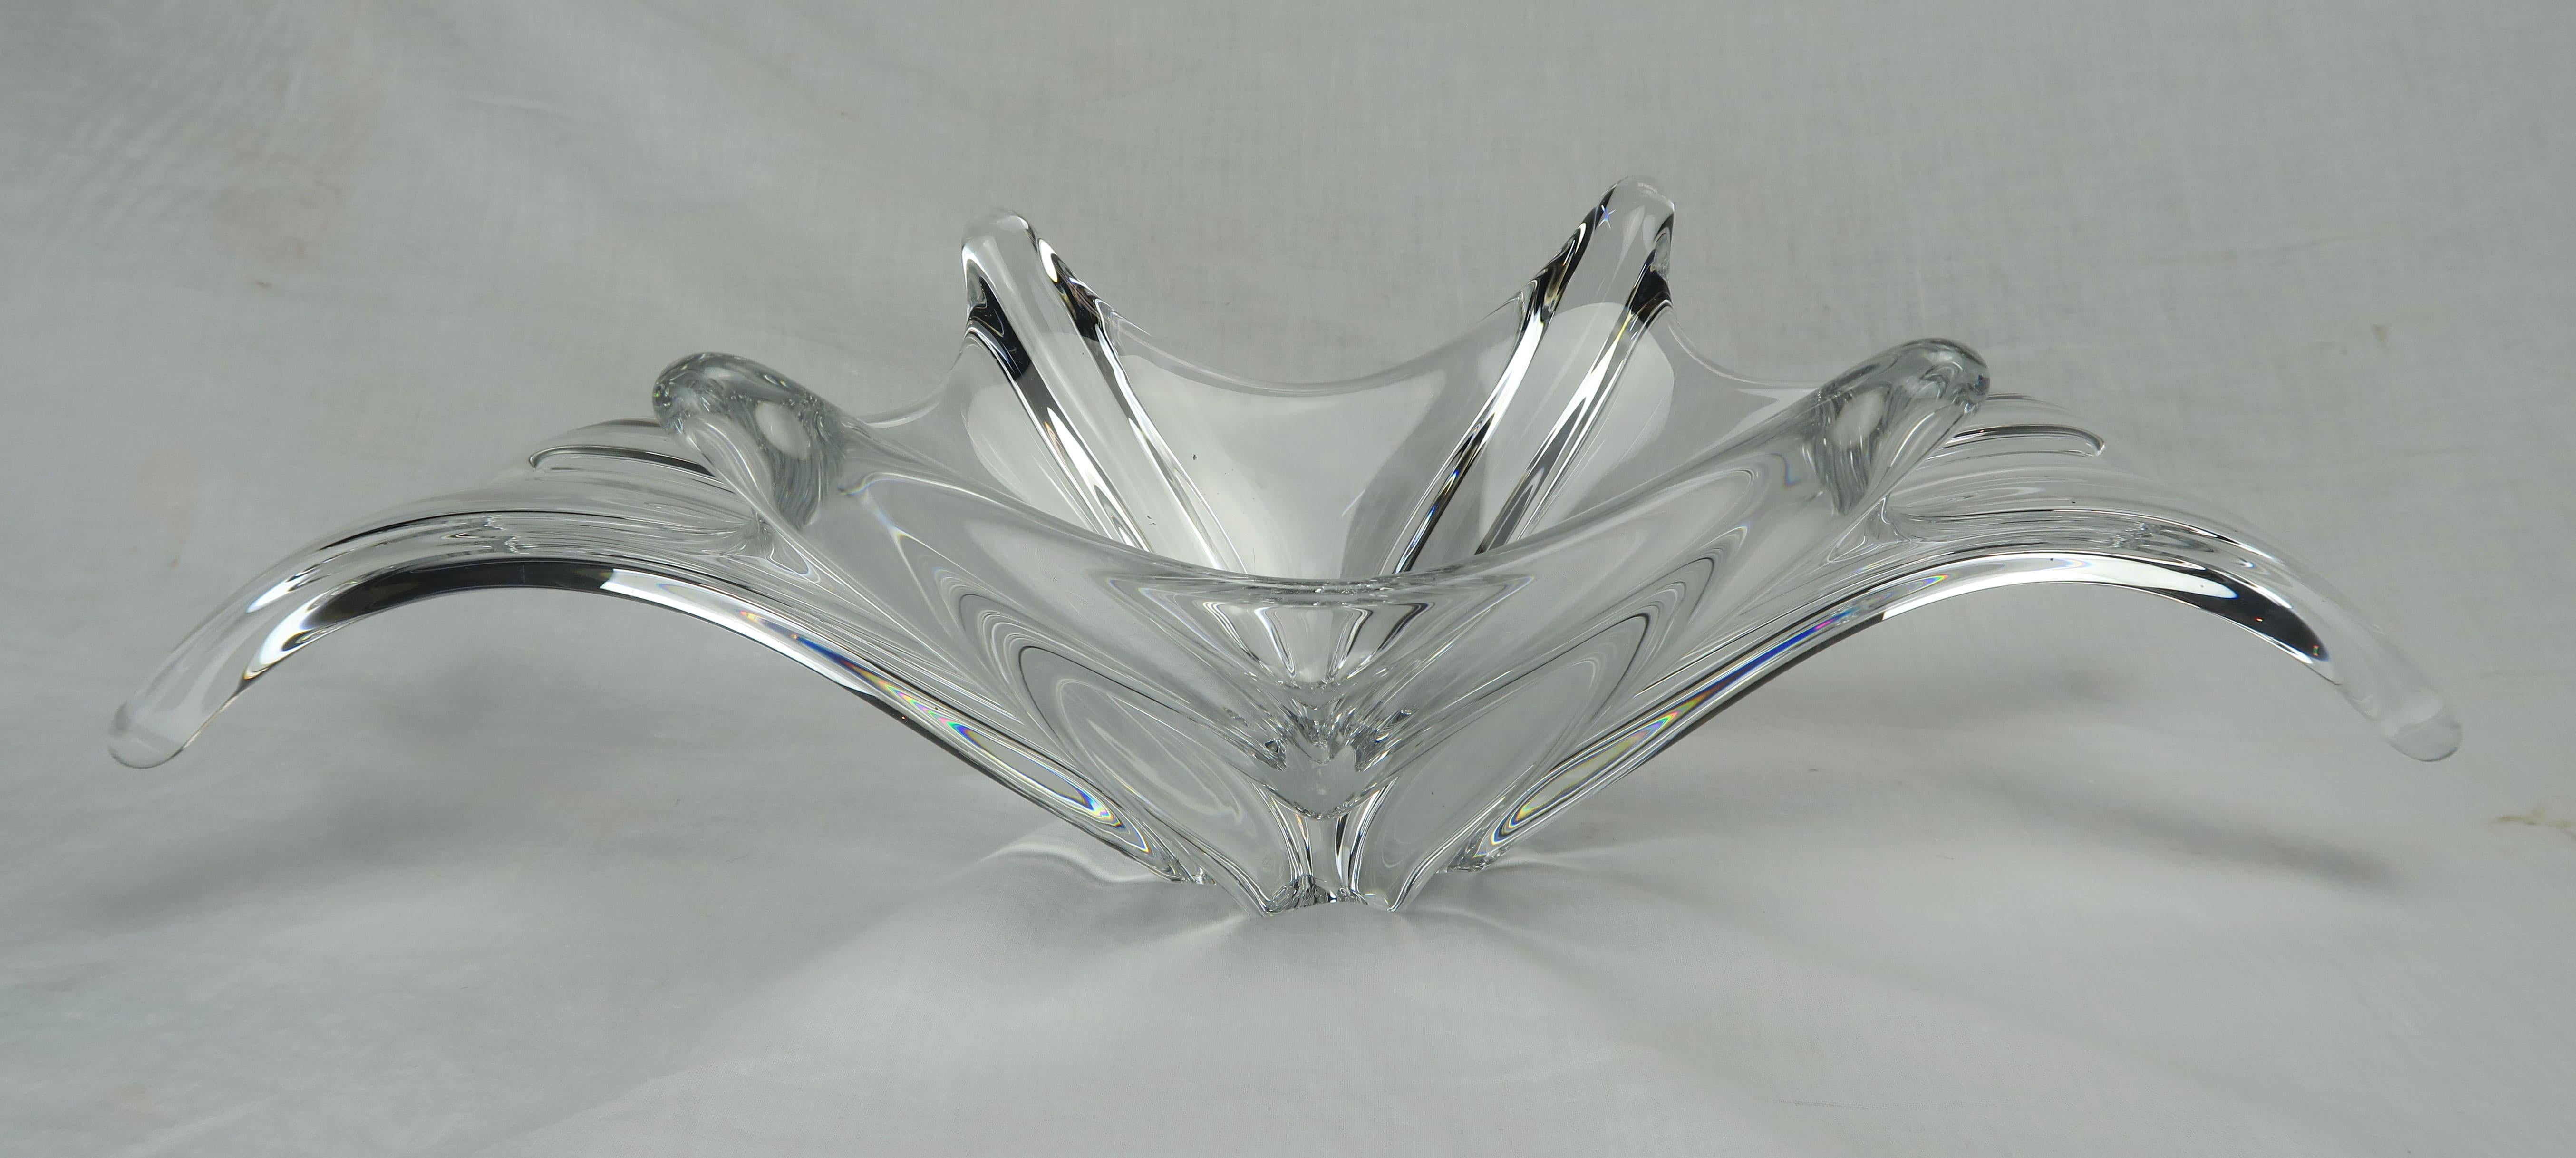 This gorgeous starburst shaped clear glass bowl was made by Baccarat (France) and looks like an organic drop of water, frozen in time. Dramatic, striking and perfect as a centerpiece. Etched makers mark and in excellent condition with minor wear on